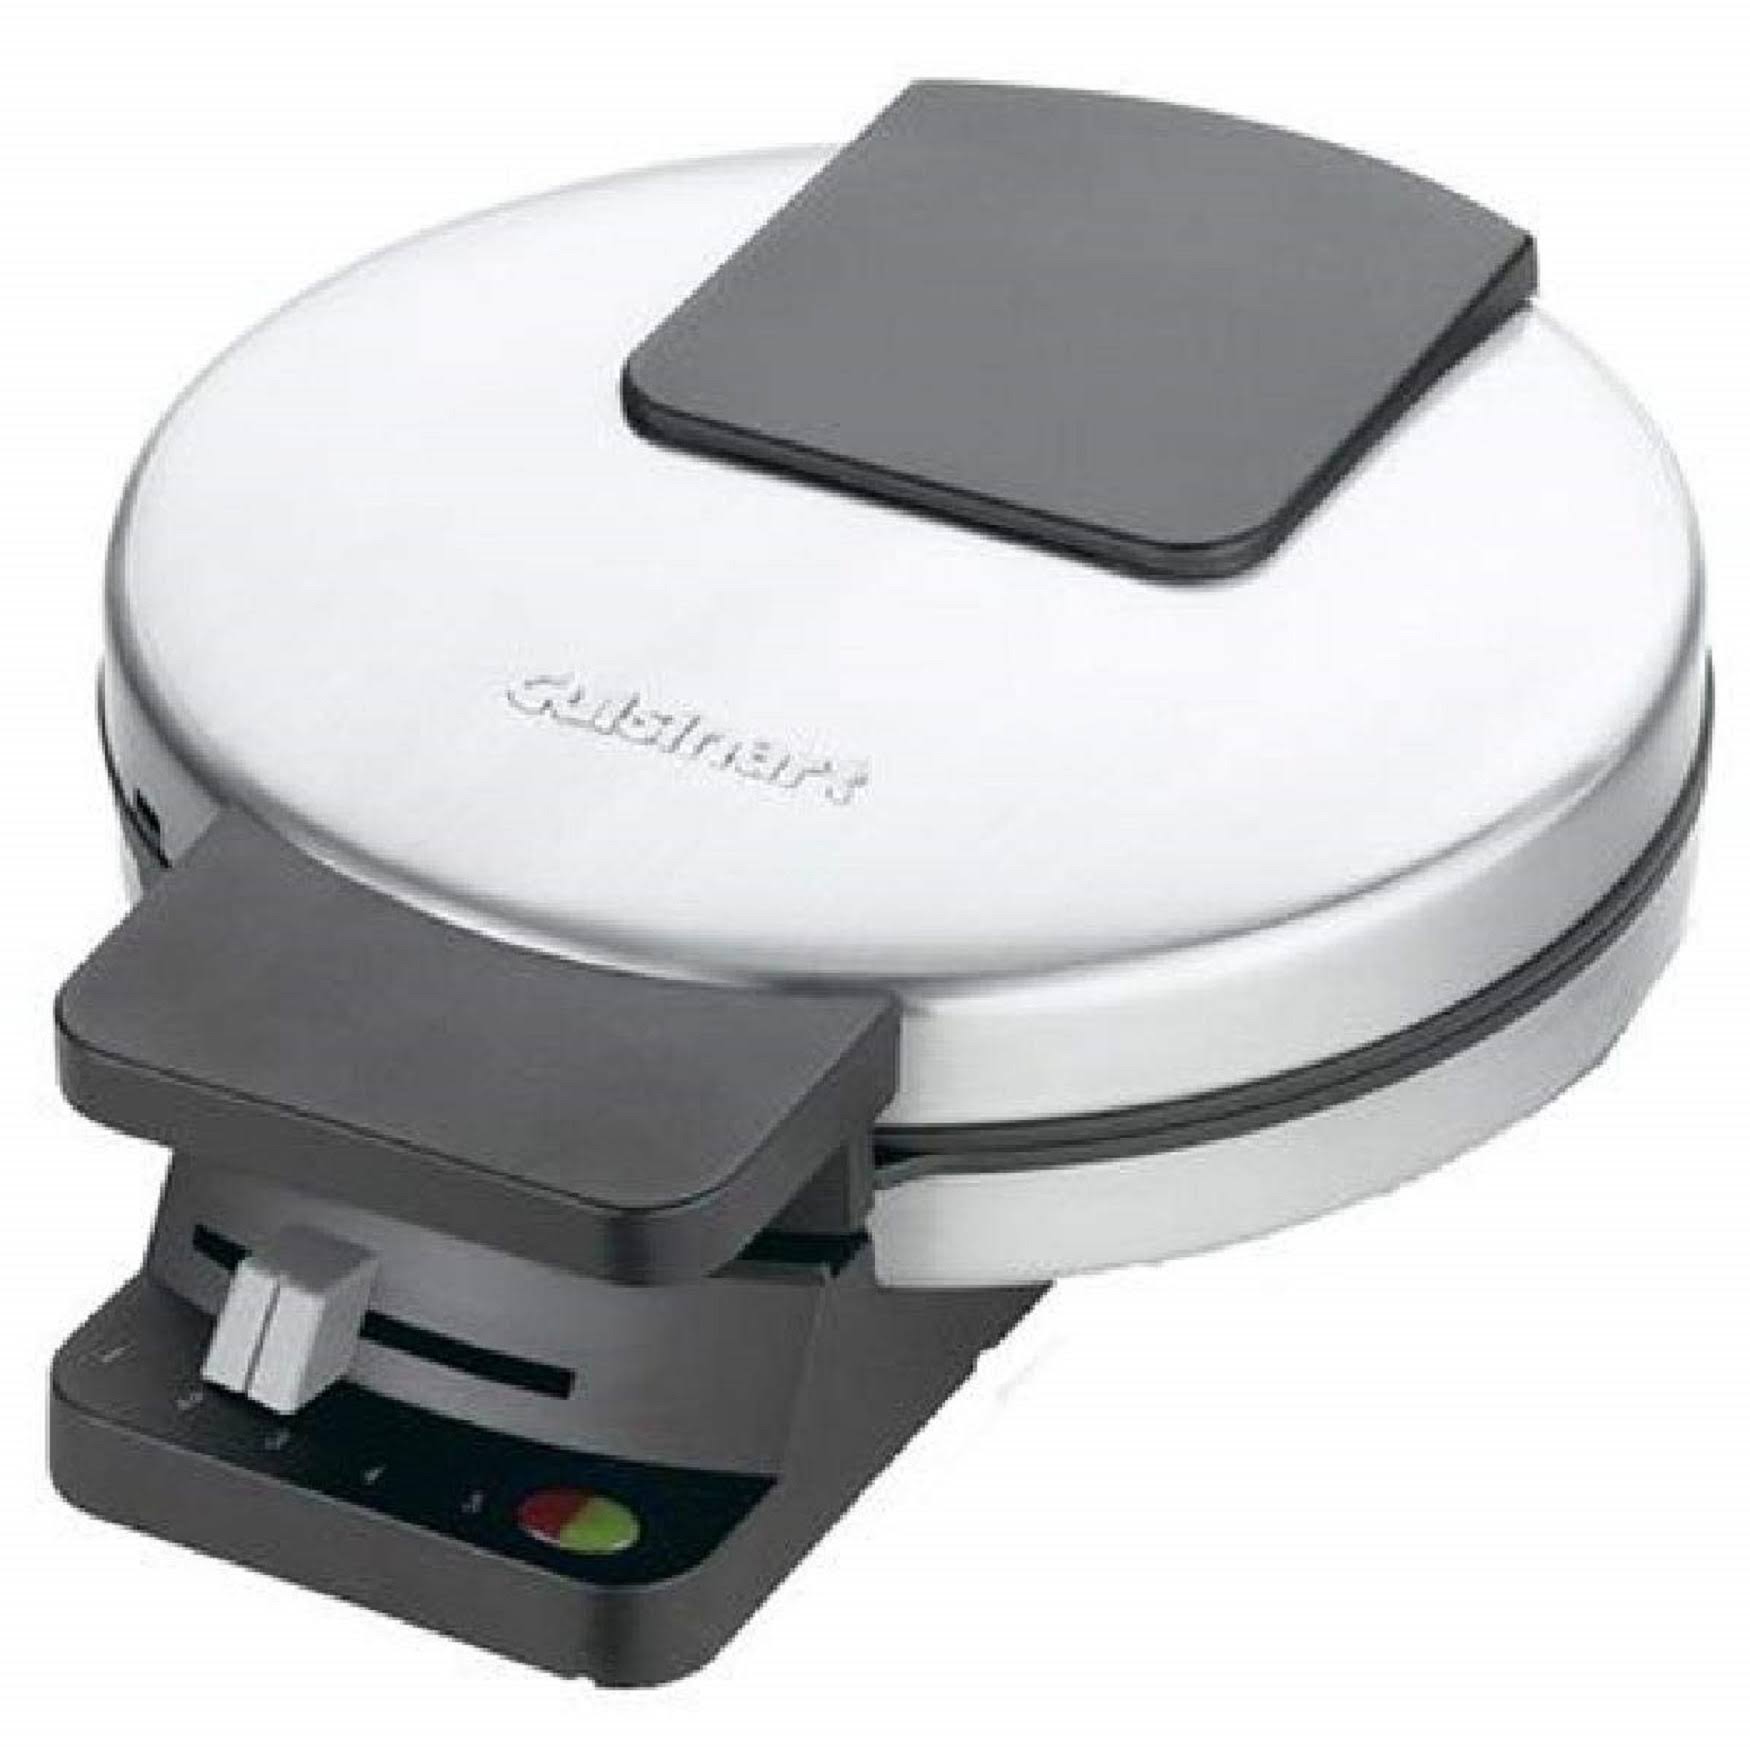 Cuisinart Classic Waffle Maker - Brushed Stainless Steel